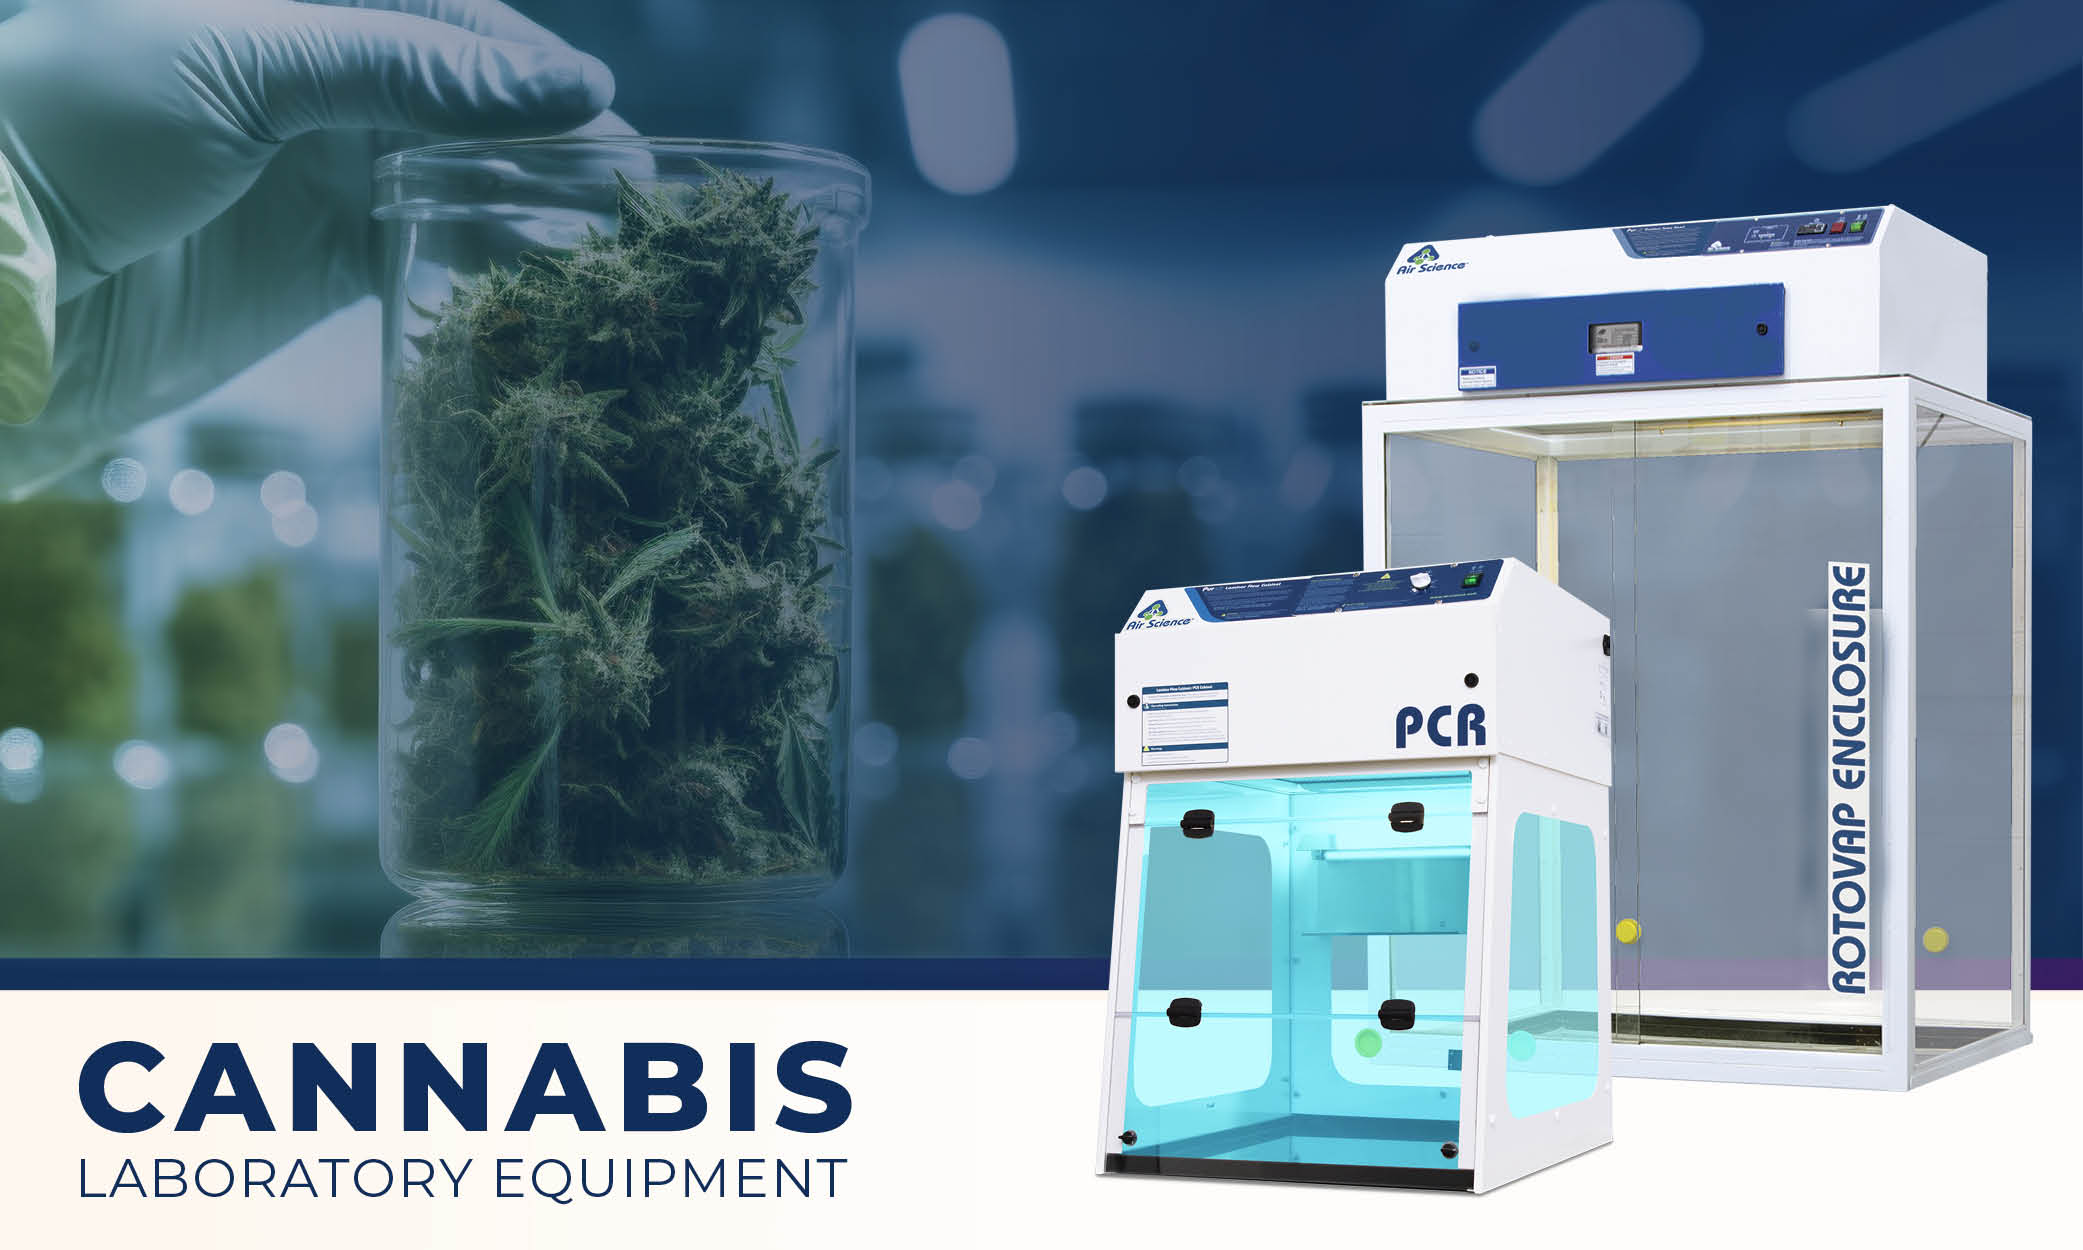 Essential Equipment for Every Cannabis Laboratory